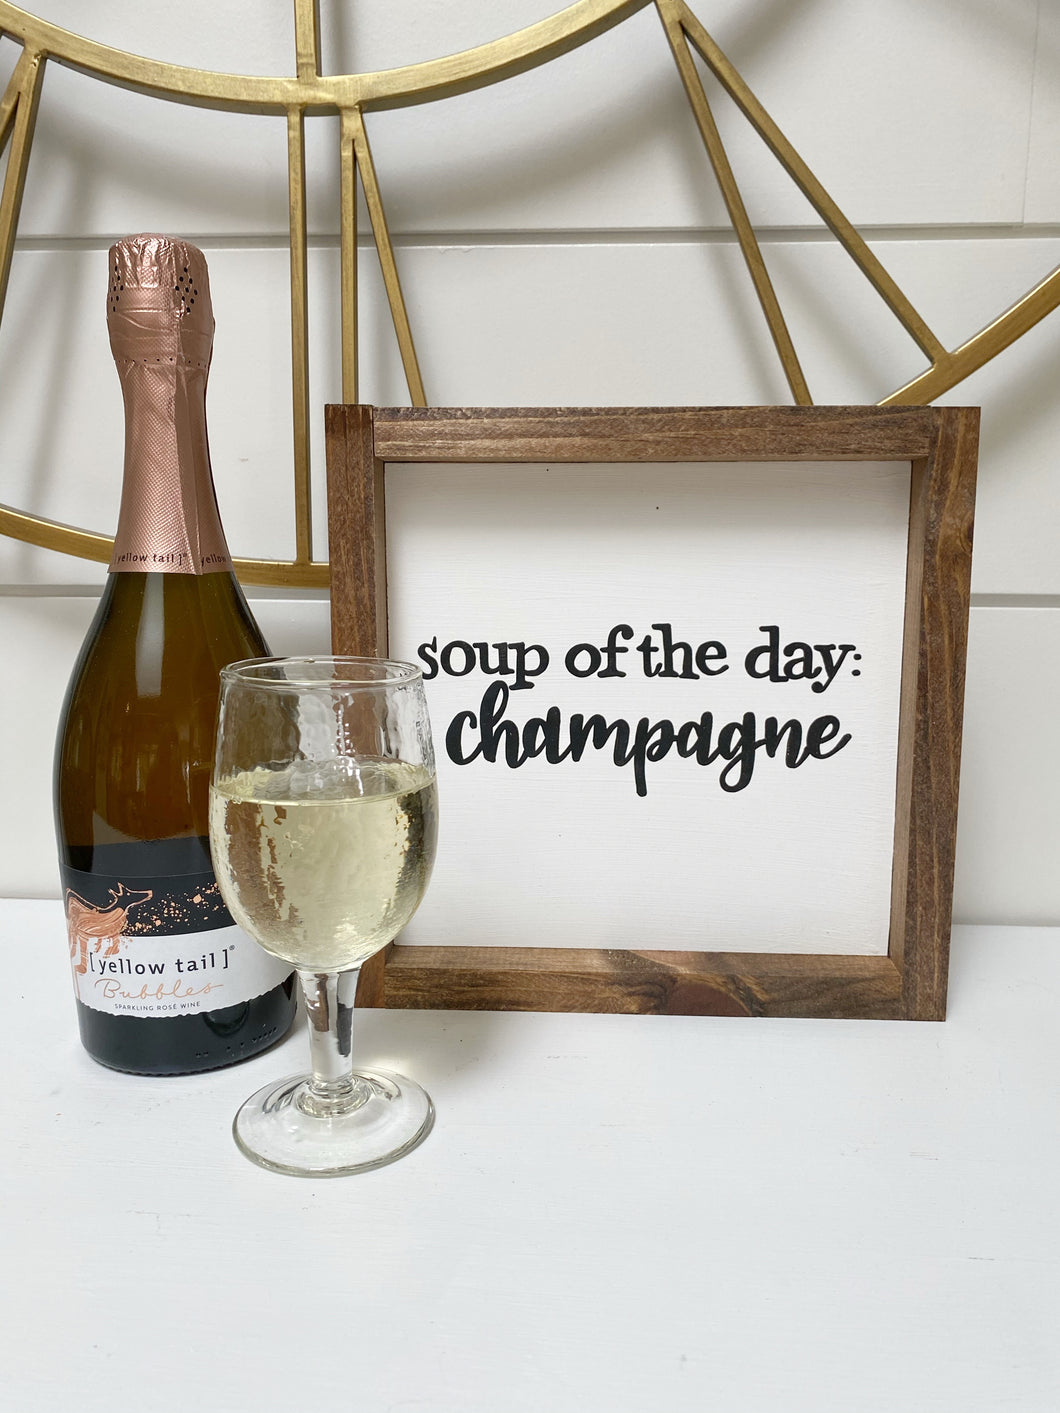 Soup of the Day: Champagne Framed Sign